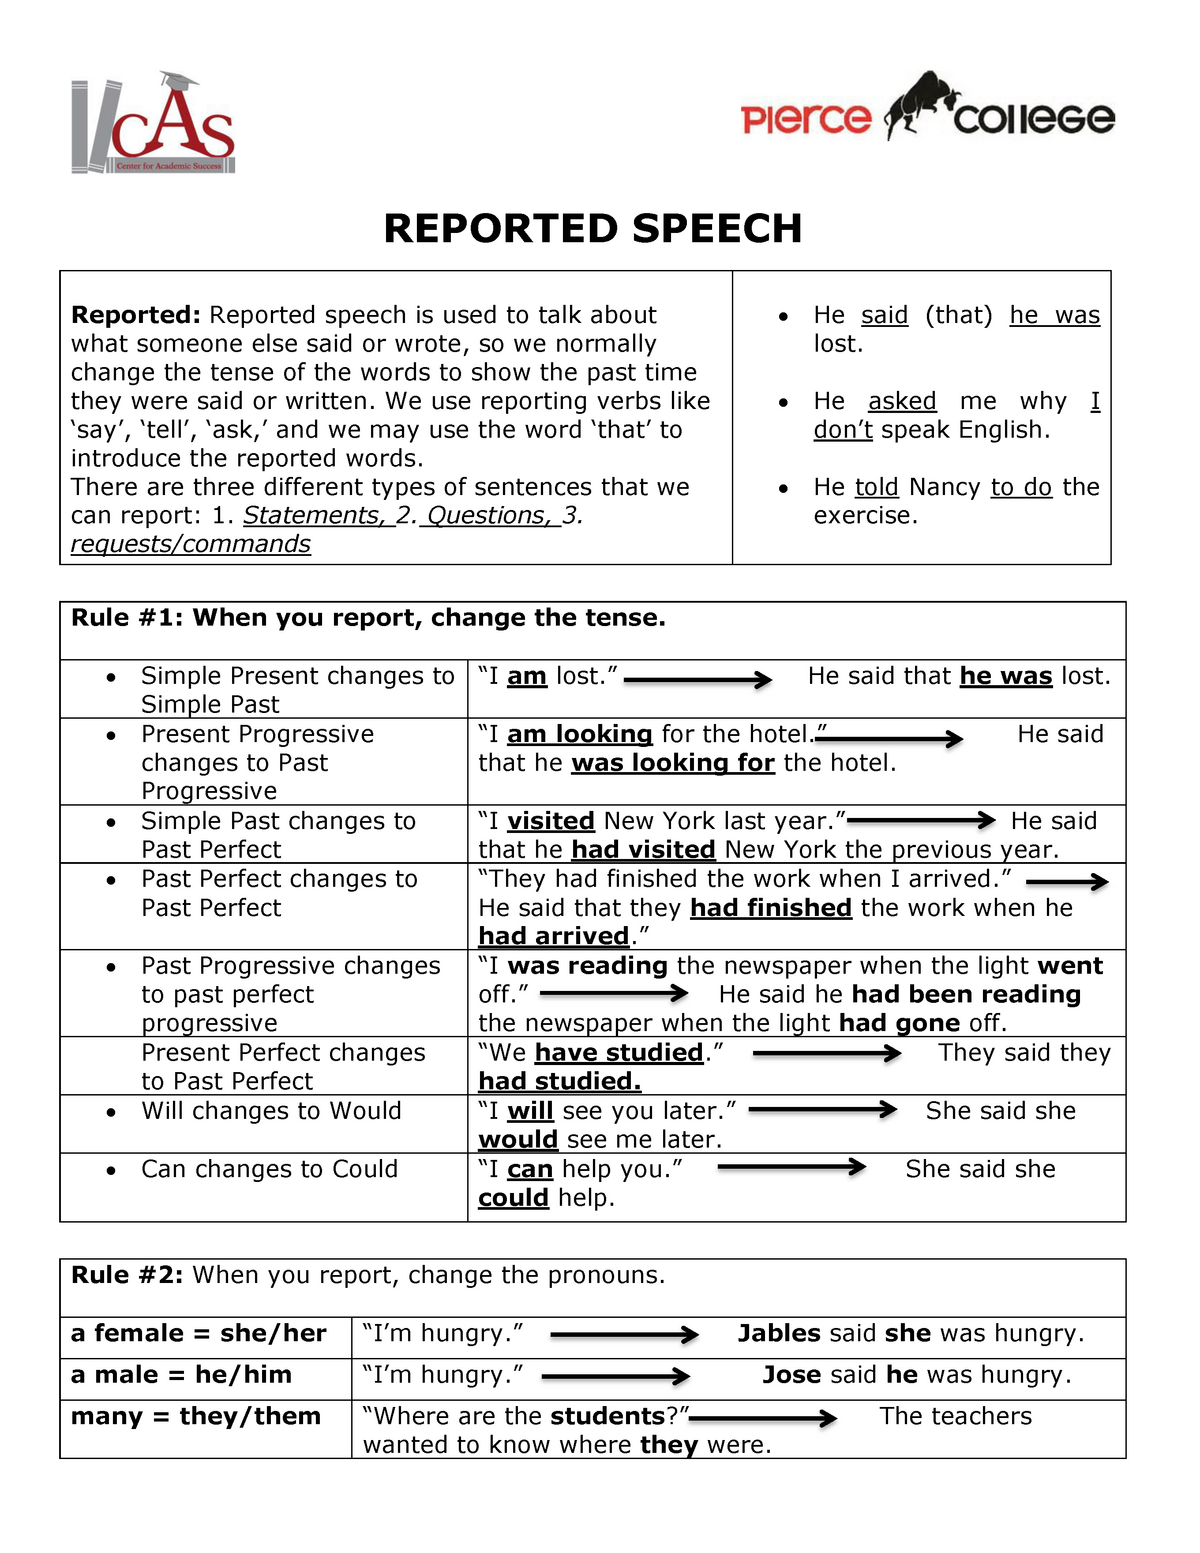 reported speech orders and requests exercises pdf